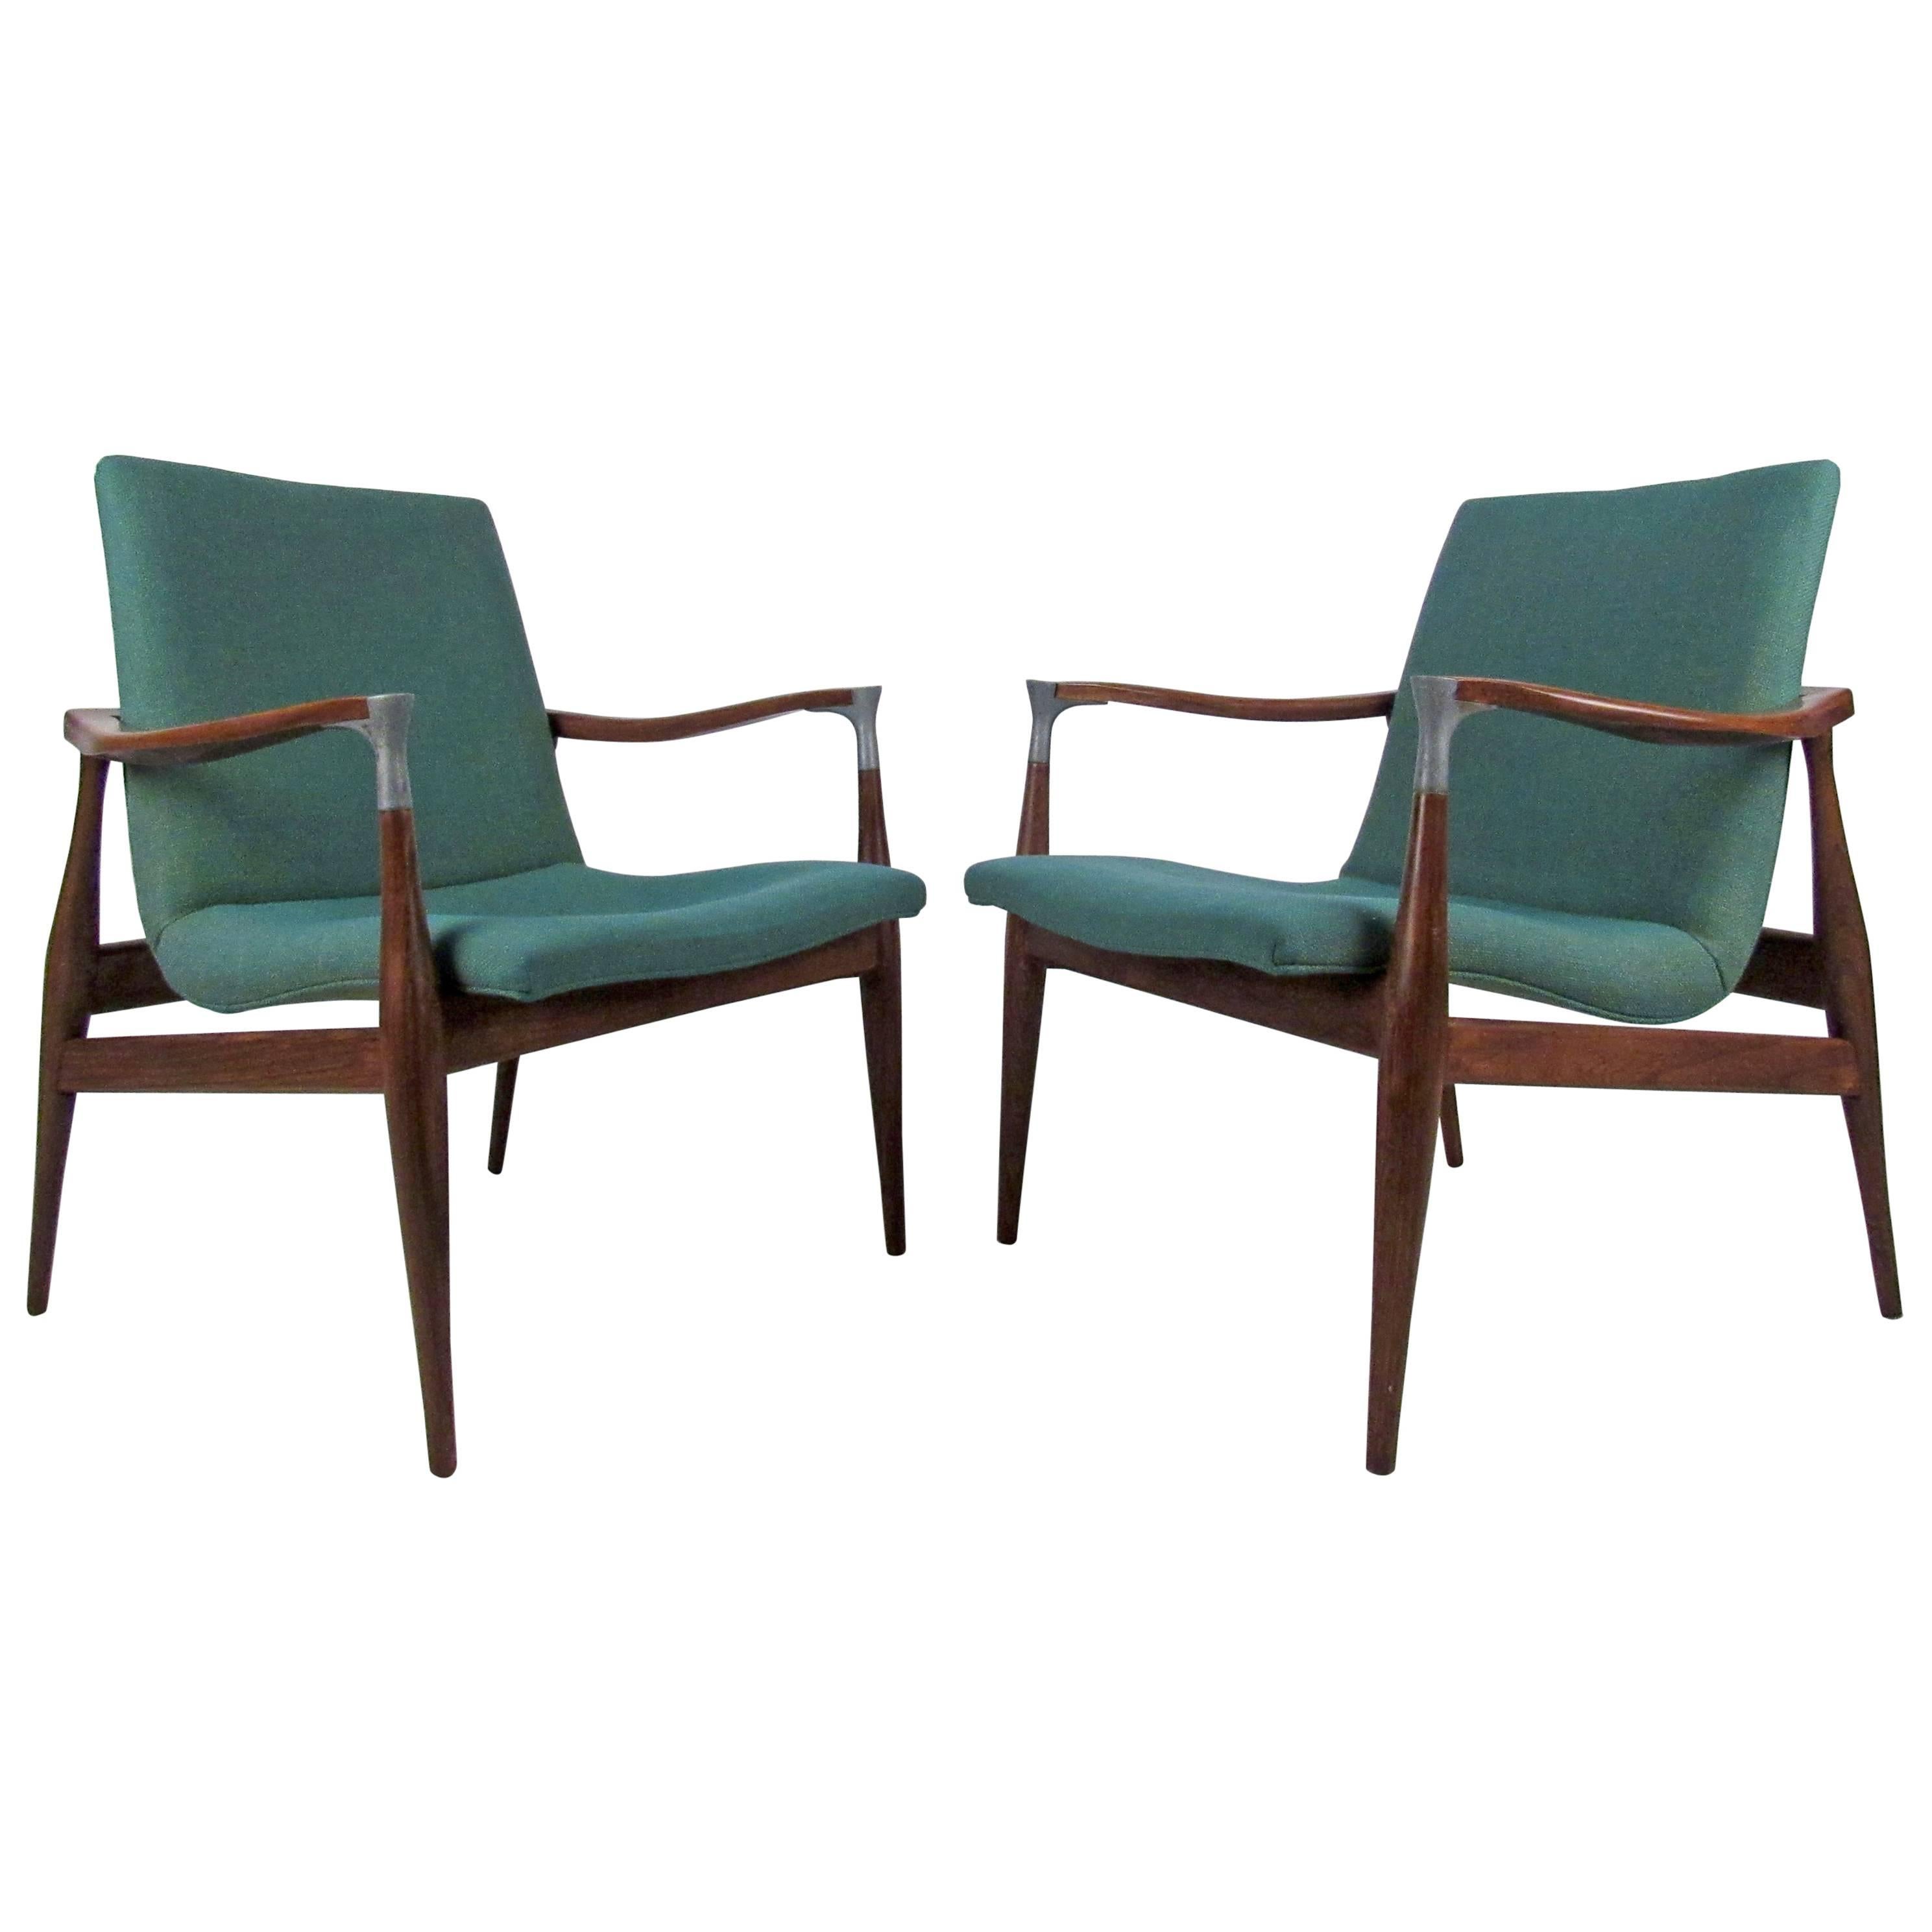 Stunning Sculpted Arm Chairs, Mid-Century Modern